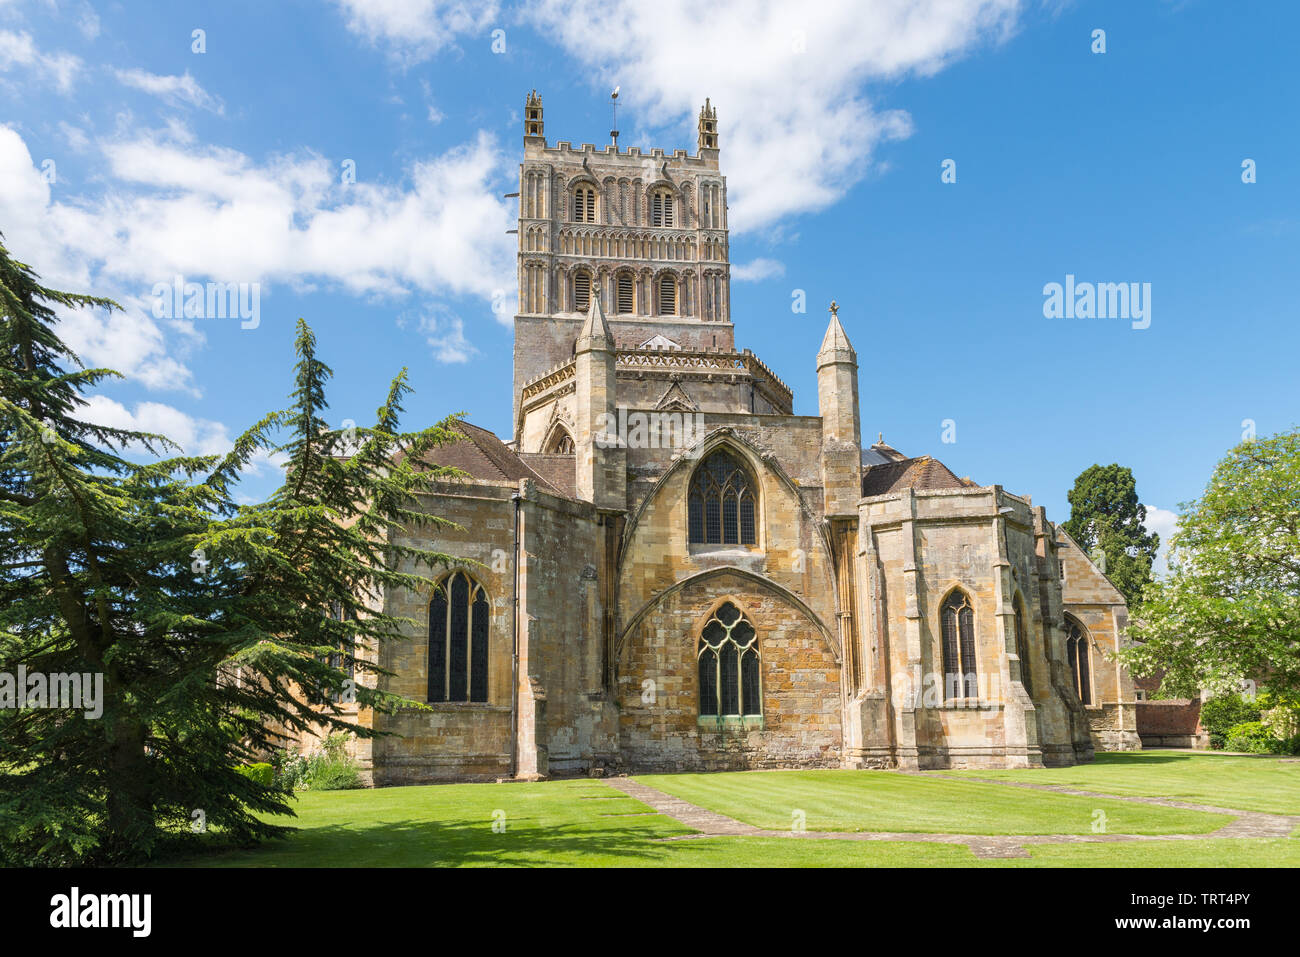 Tewkesbury Abbey, Gloucestershire which has a Norman edifice and romanesque tower Stock Photo